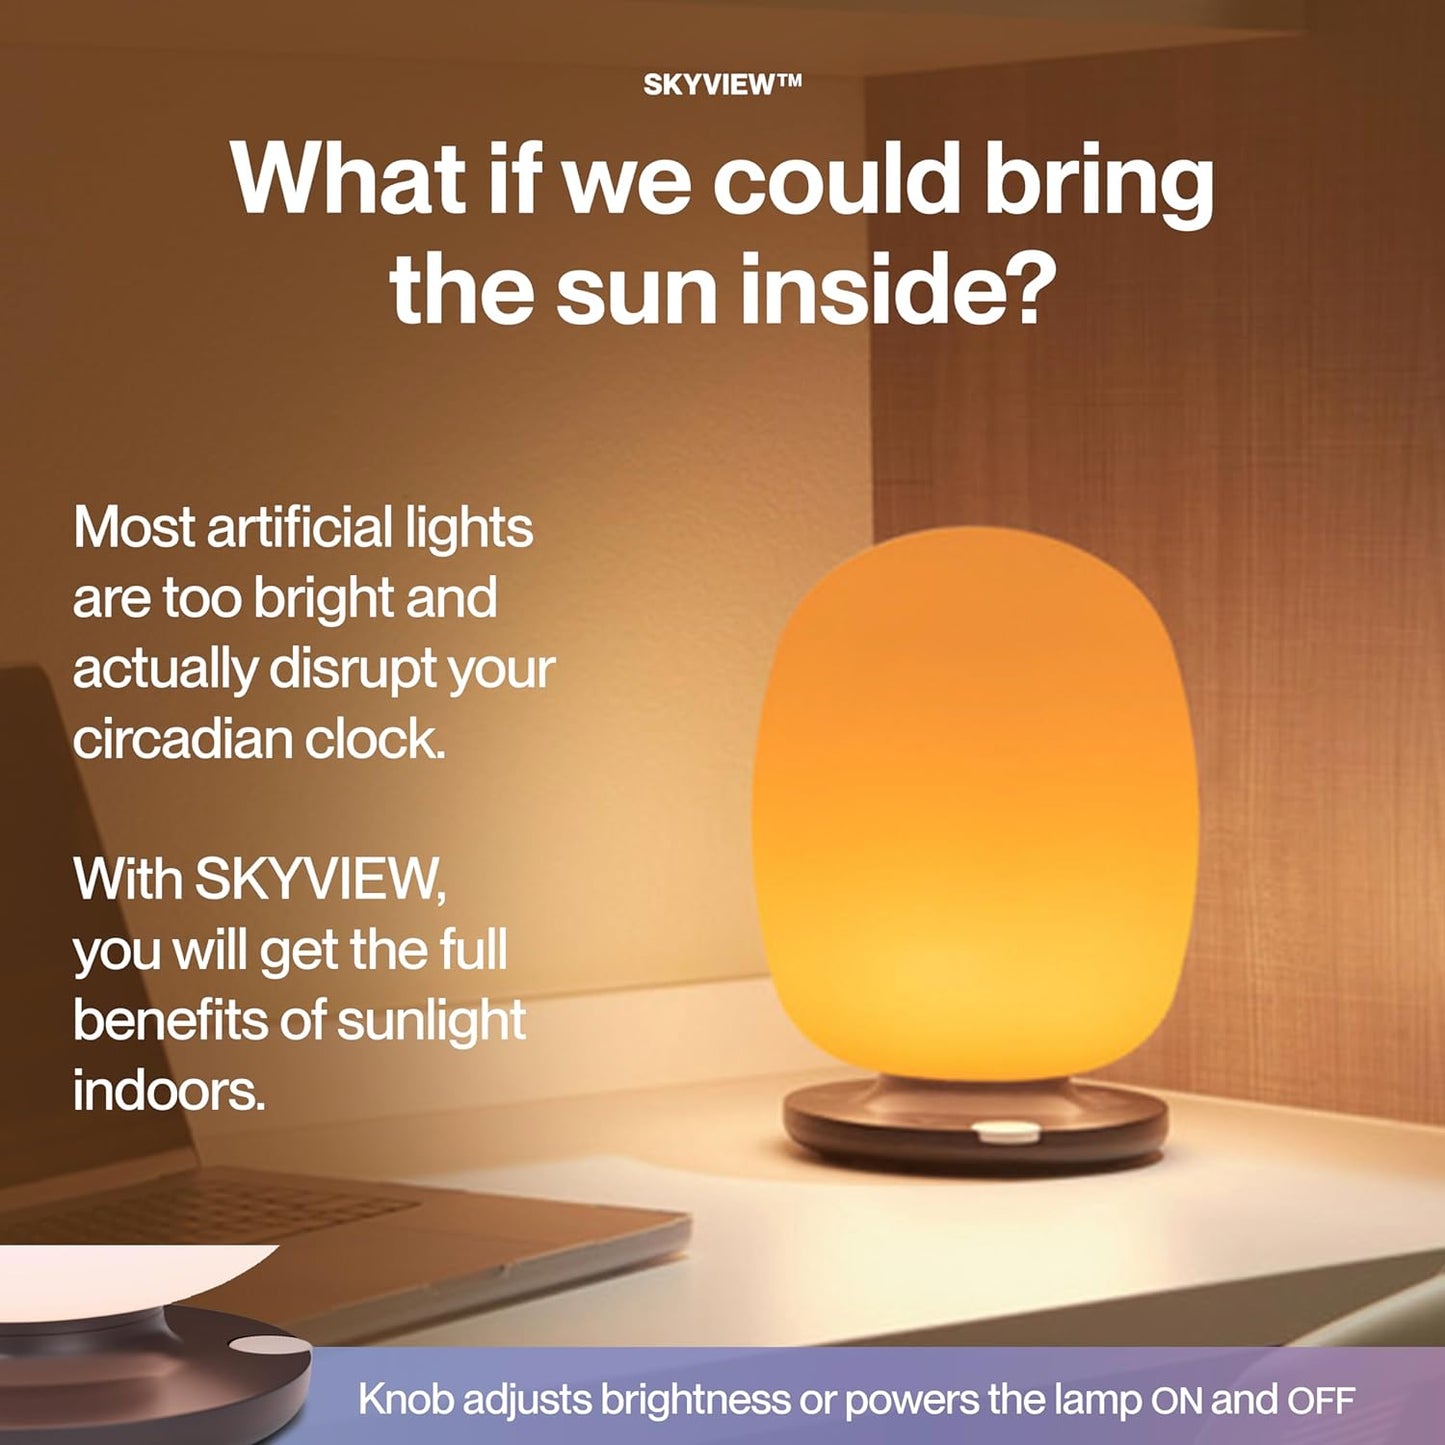 SKYVIEW 2 Wellness Table Lamp Designed by NASA Engineers  Improves Focus, Boosts Mood, and Helps You Sleep Better